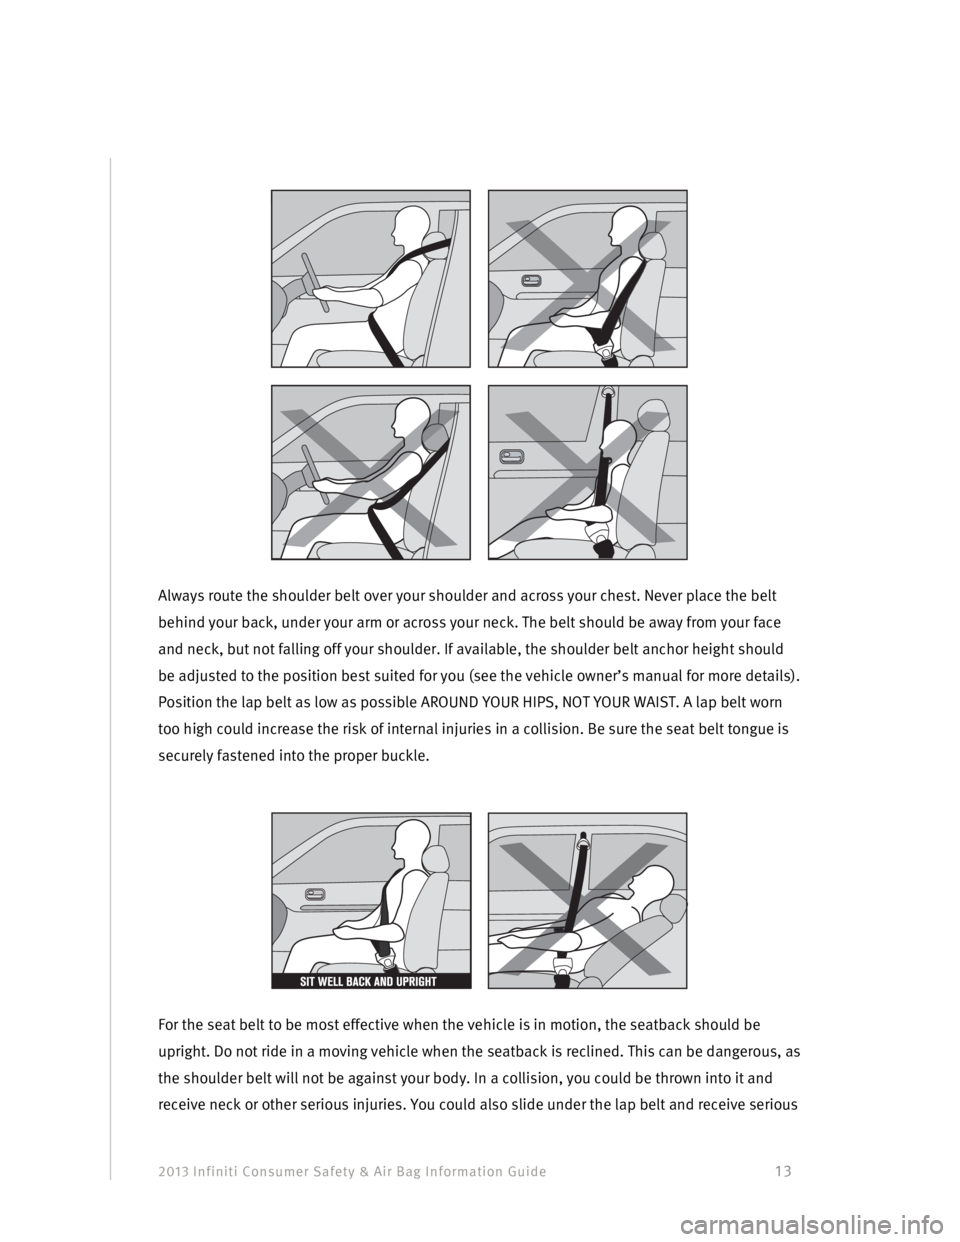 INFINITI EX 2013  Consumer Safety And Air Bag Information Guide 2013 Infiniti Consumer Safety & Air Bag Information Guide                                         13 
 
 
 
Always route the shoulder belt over your shoulder and across your chest. Never place the bel